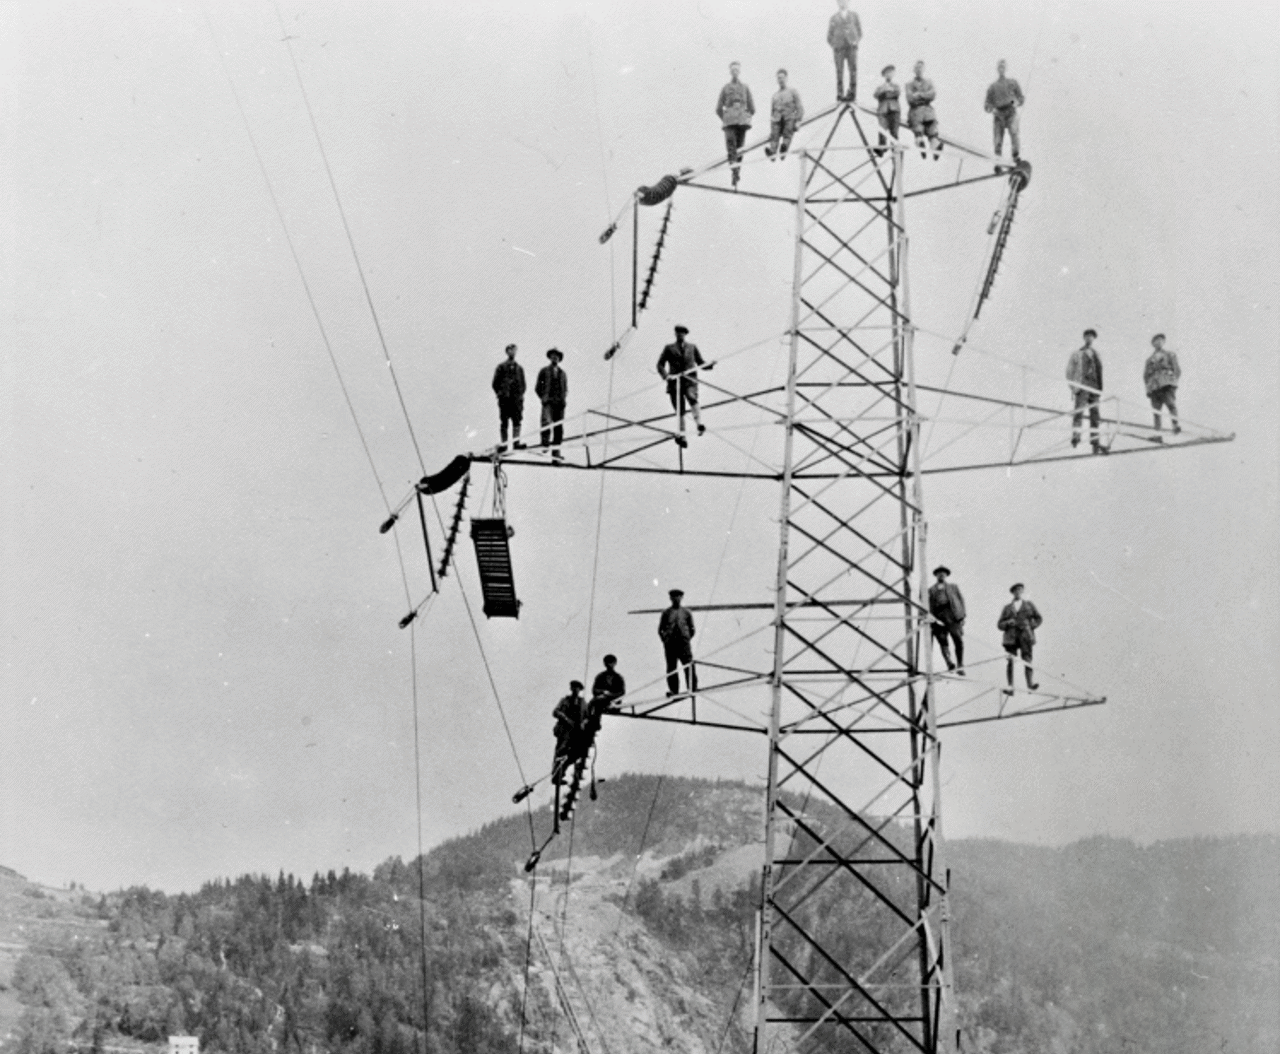 Black and white photo of men in power mast